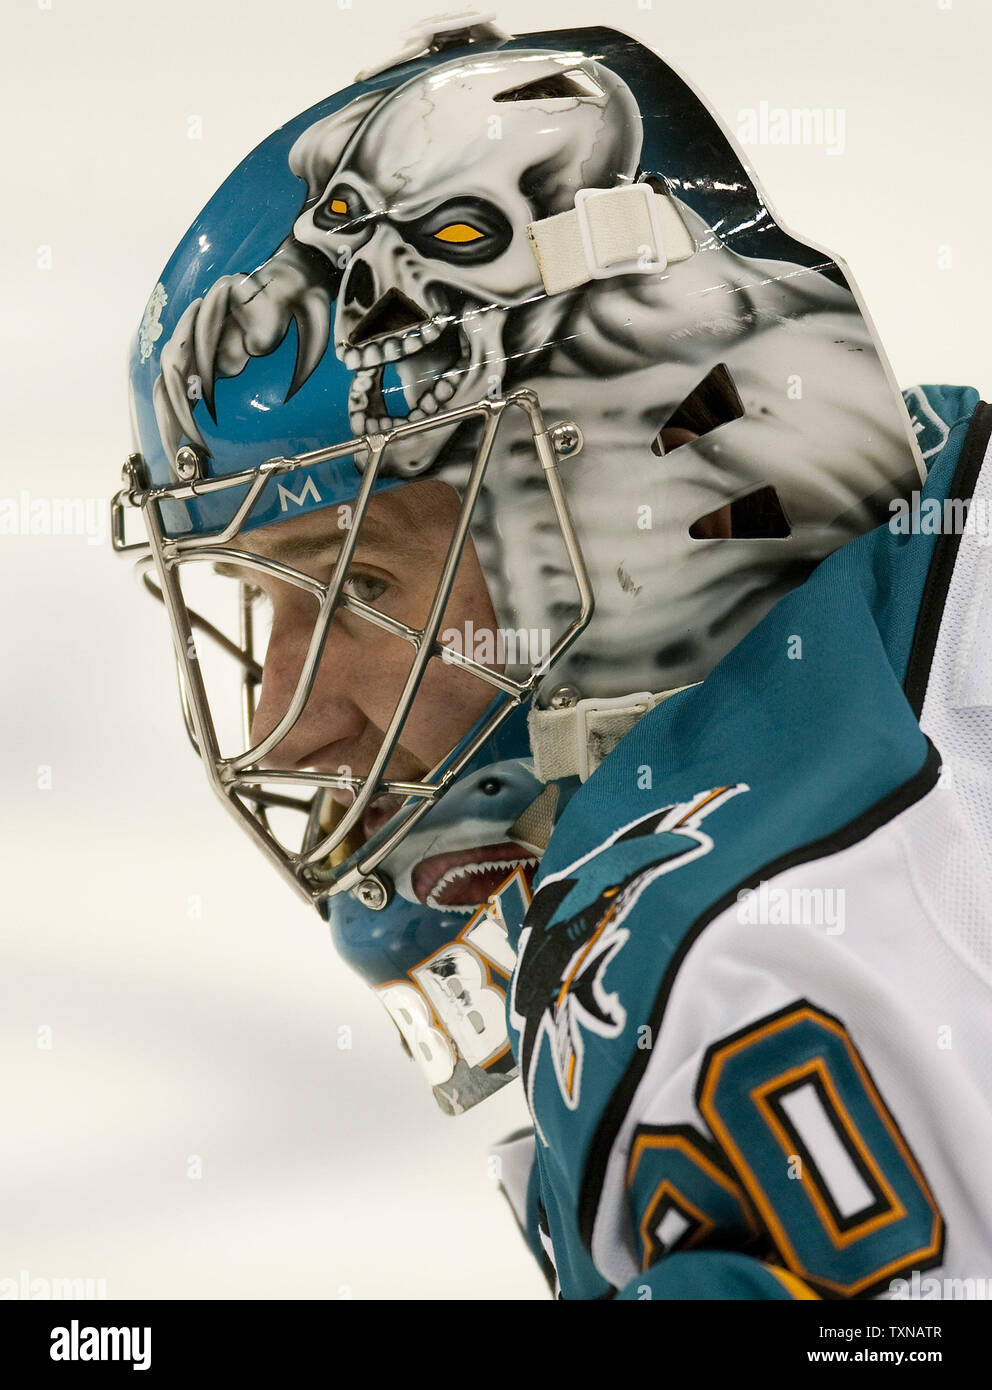 San Jose Sharks goalie Evgeni Nabokov watches the Colorado Avalanche during warm ups at the Pepsi Center on April 4, 2010 in Denver.     Colorado beat San Jose and Nabokov 5-4 in overtime.    UPI/Gary C. Caskey Stock Photo